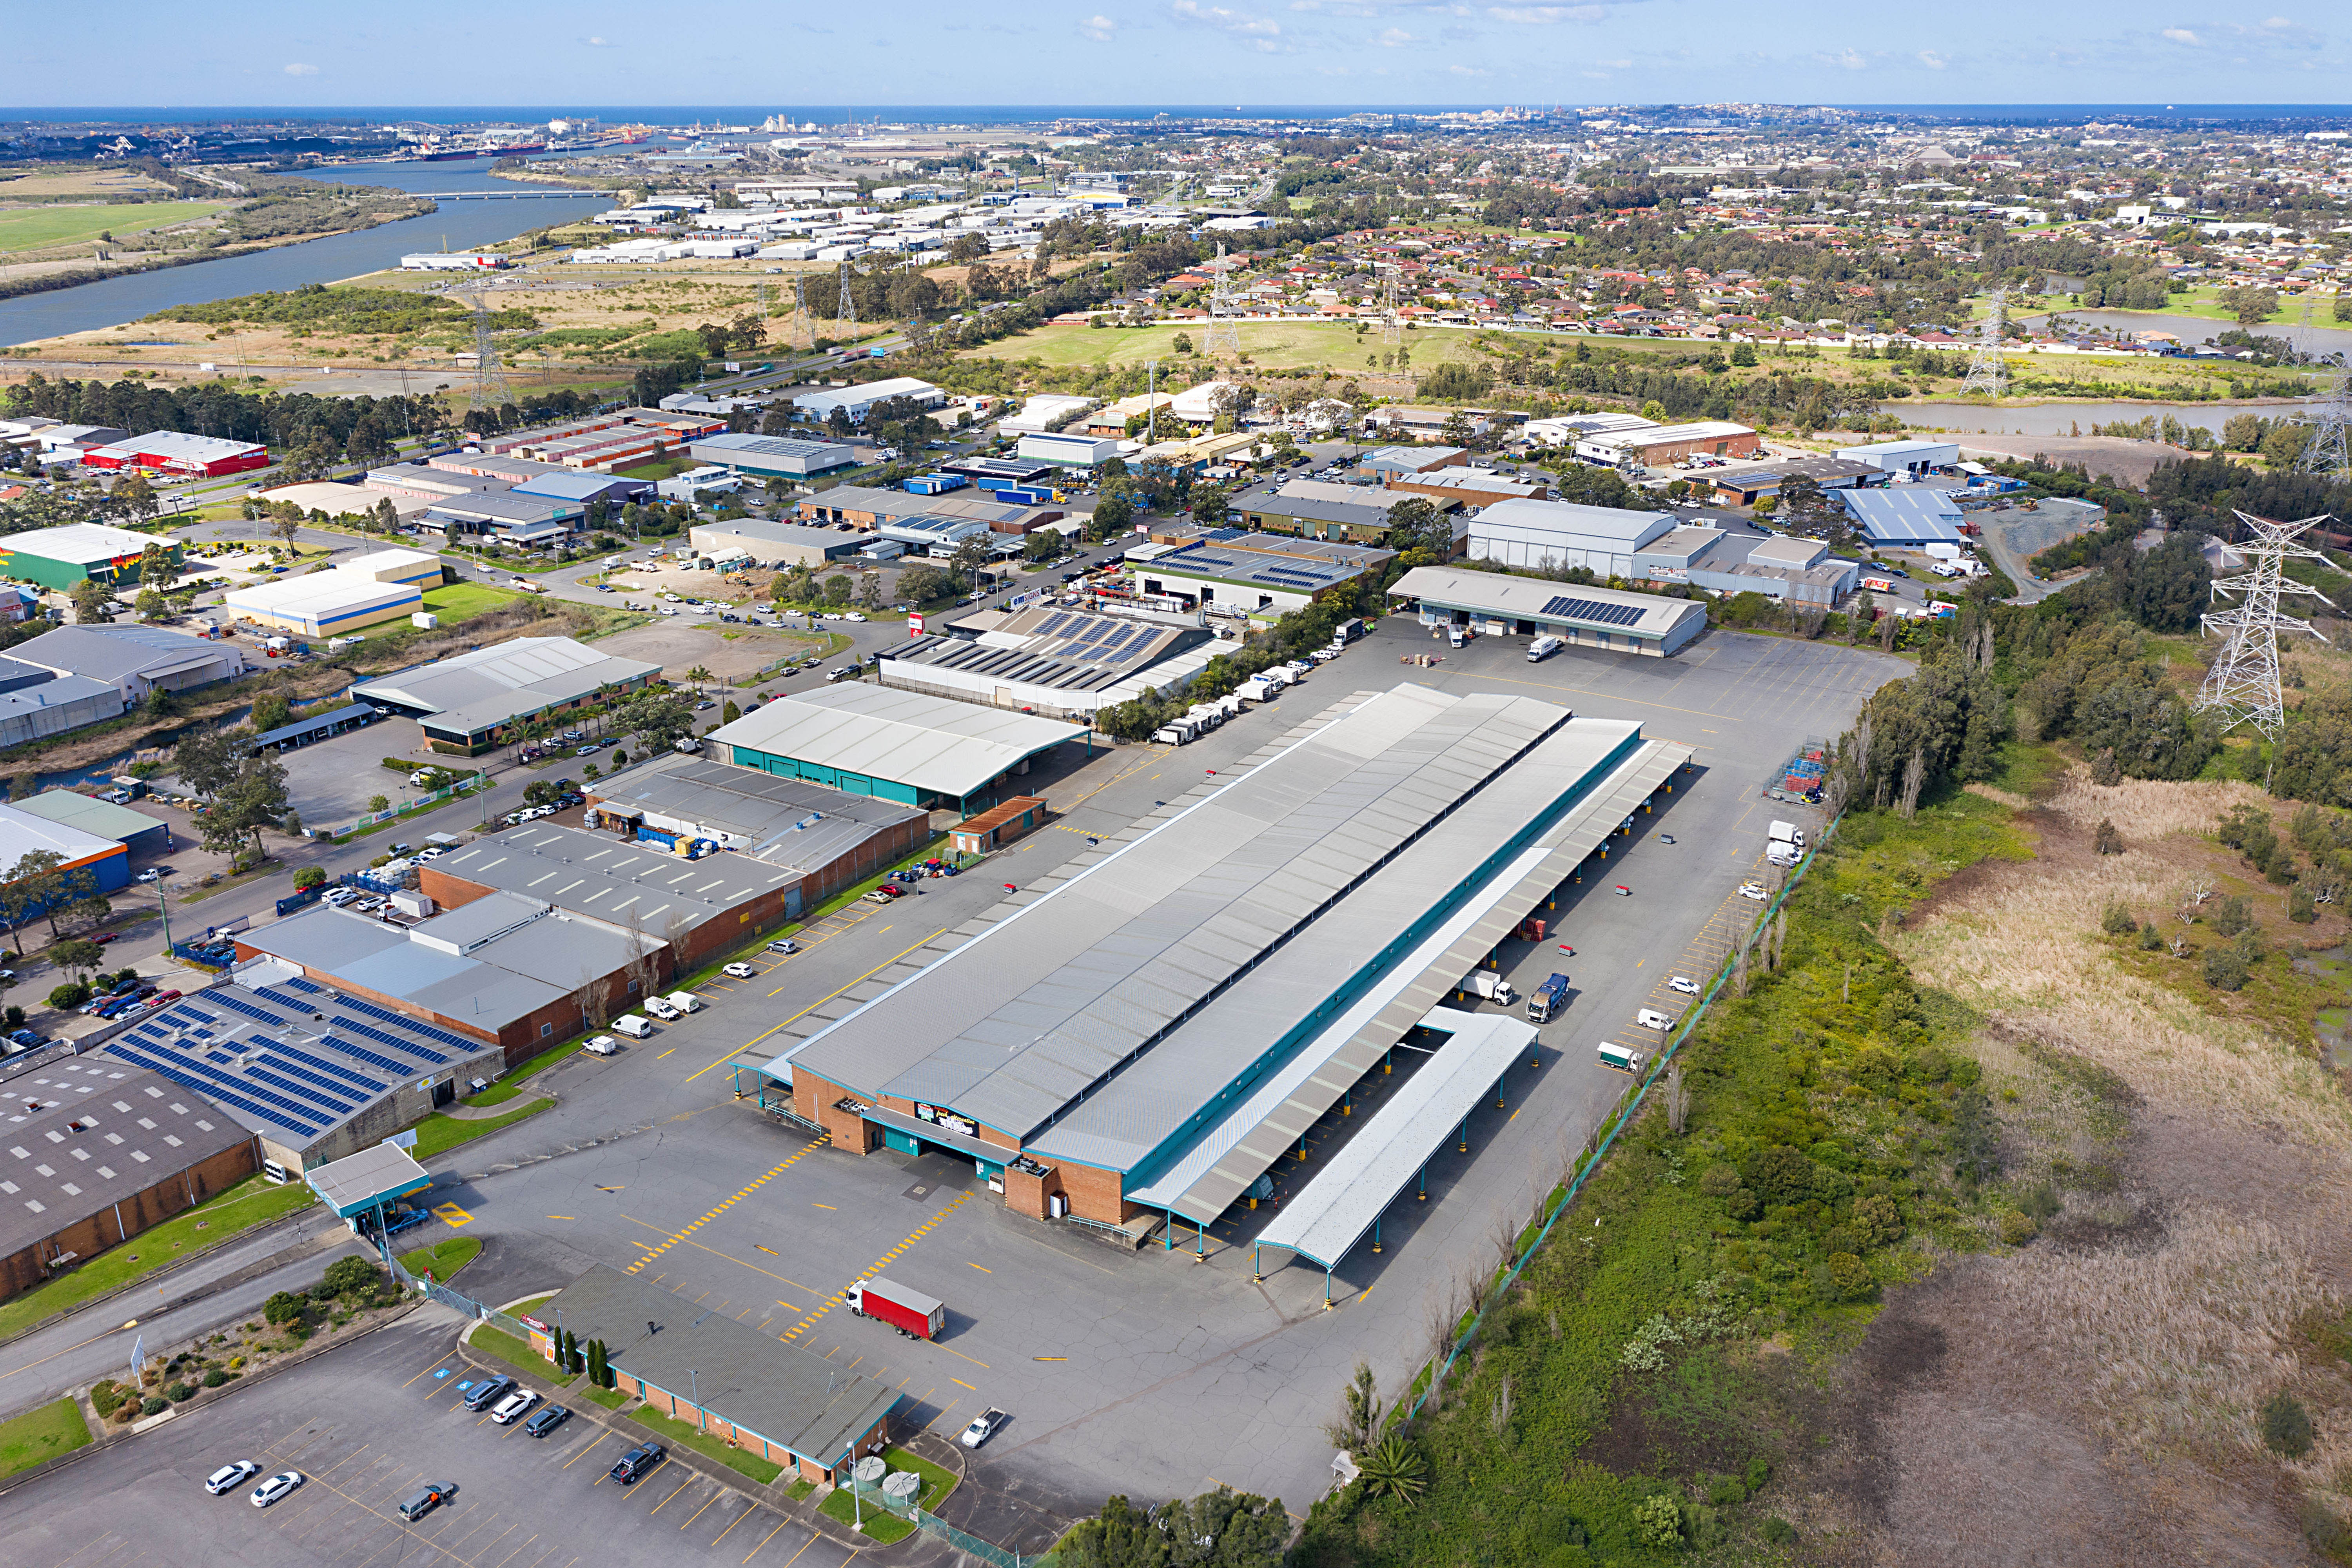 Maas Group Holdings expands commercial property portfolio in the Newcastle region with acquisition of the Newcastle Fruit Markets site